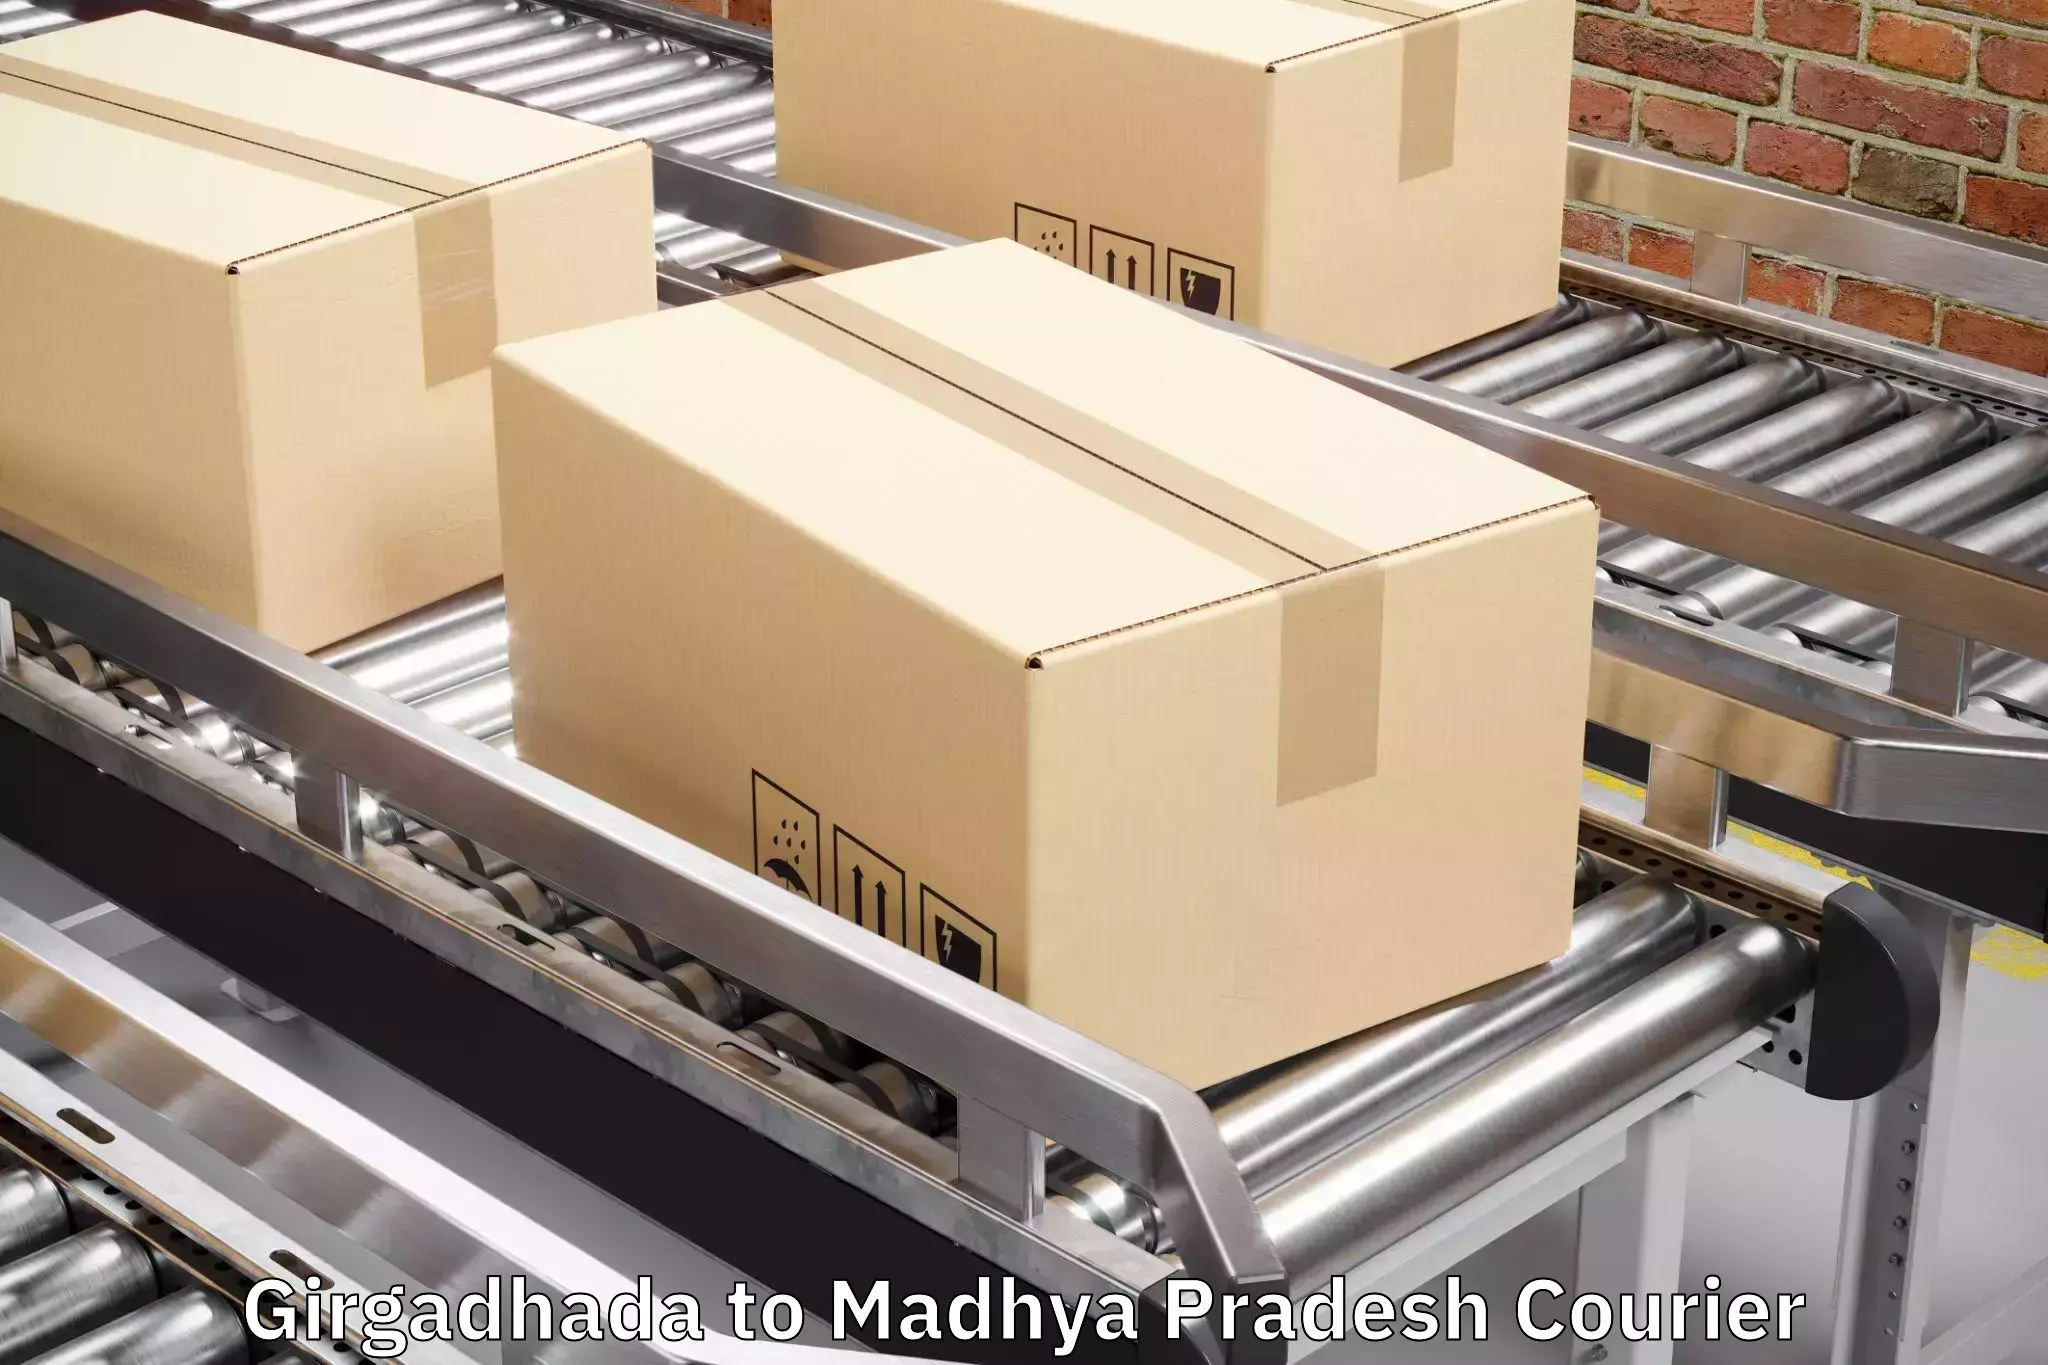 Baggage delivery technology in Girgadhada to Bhind